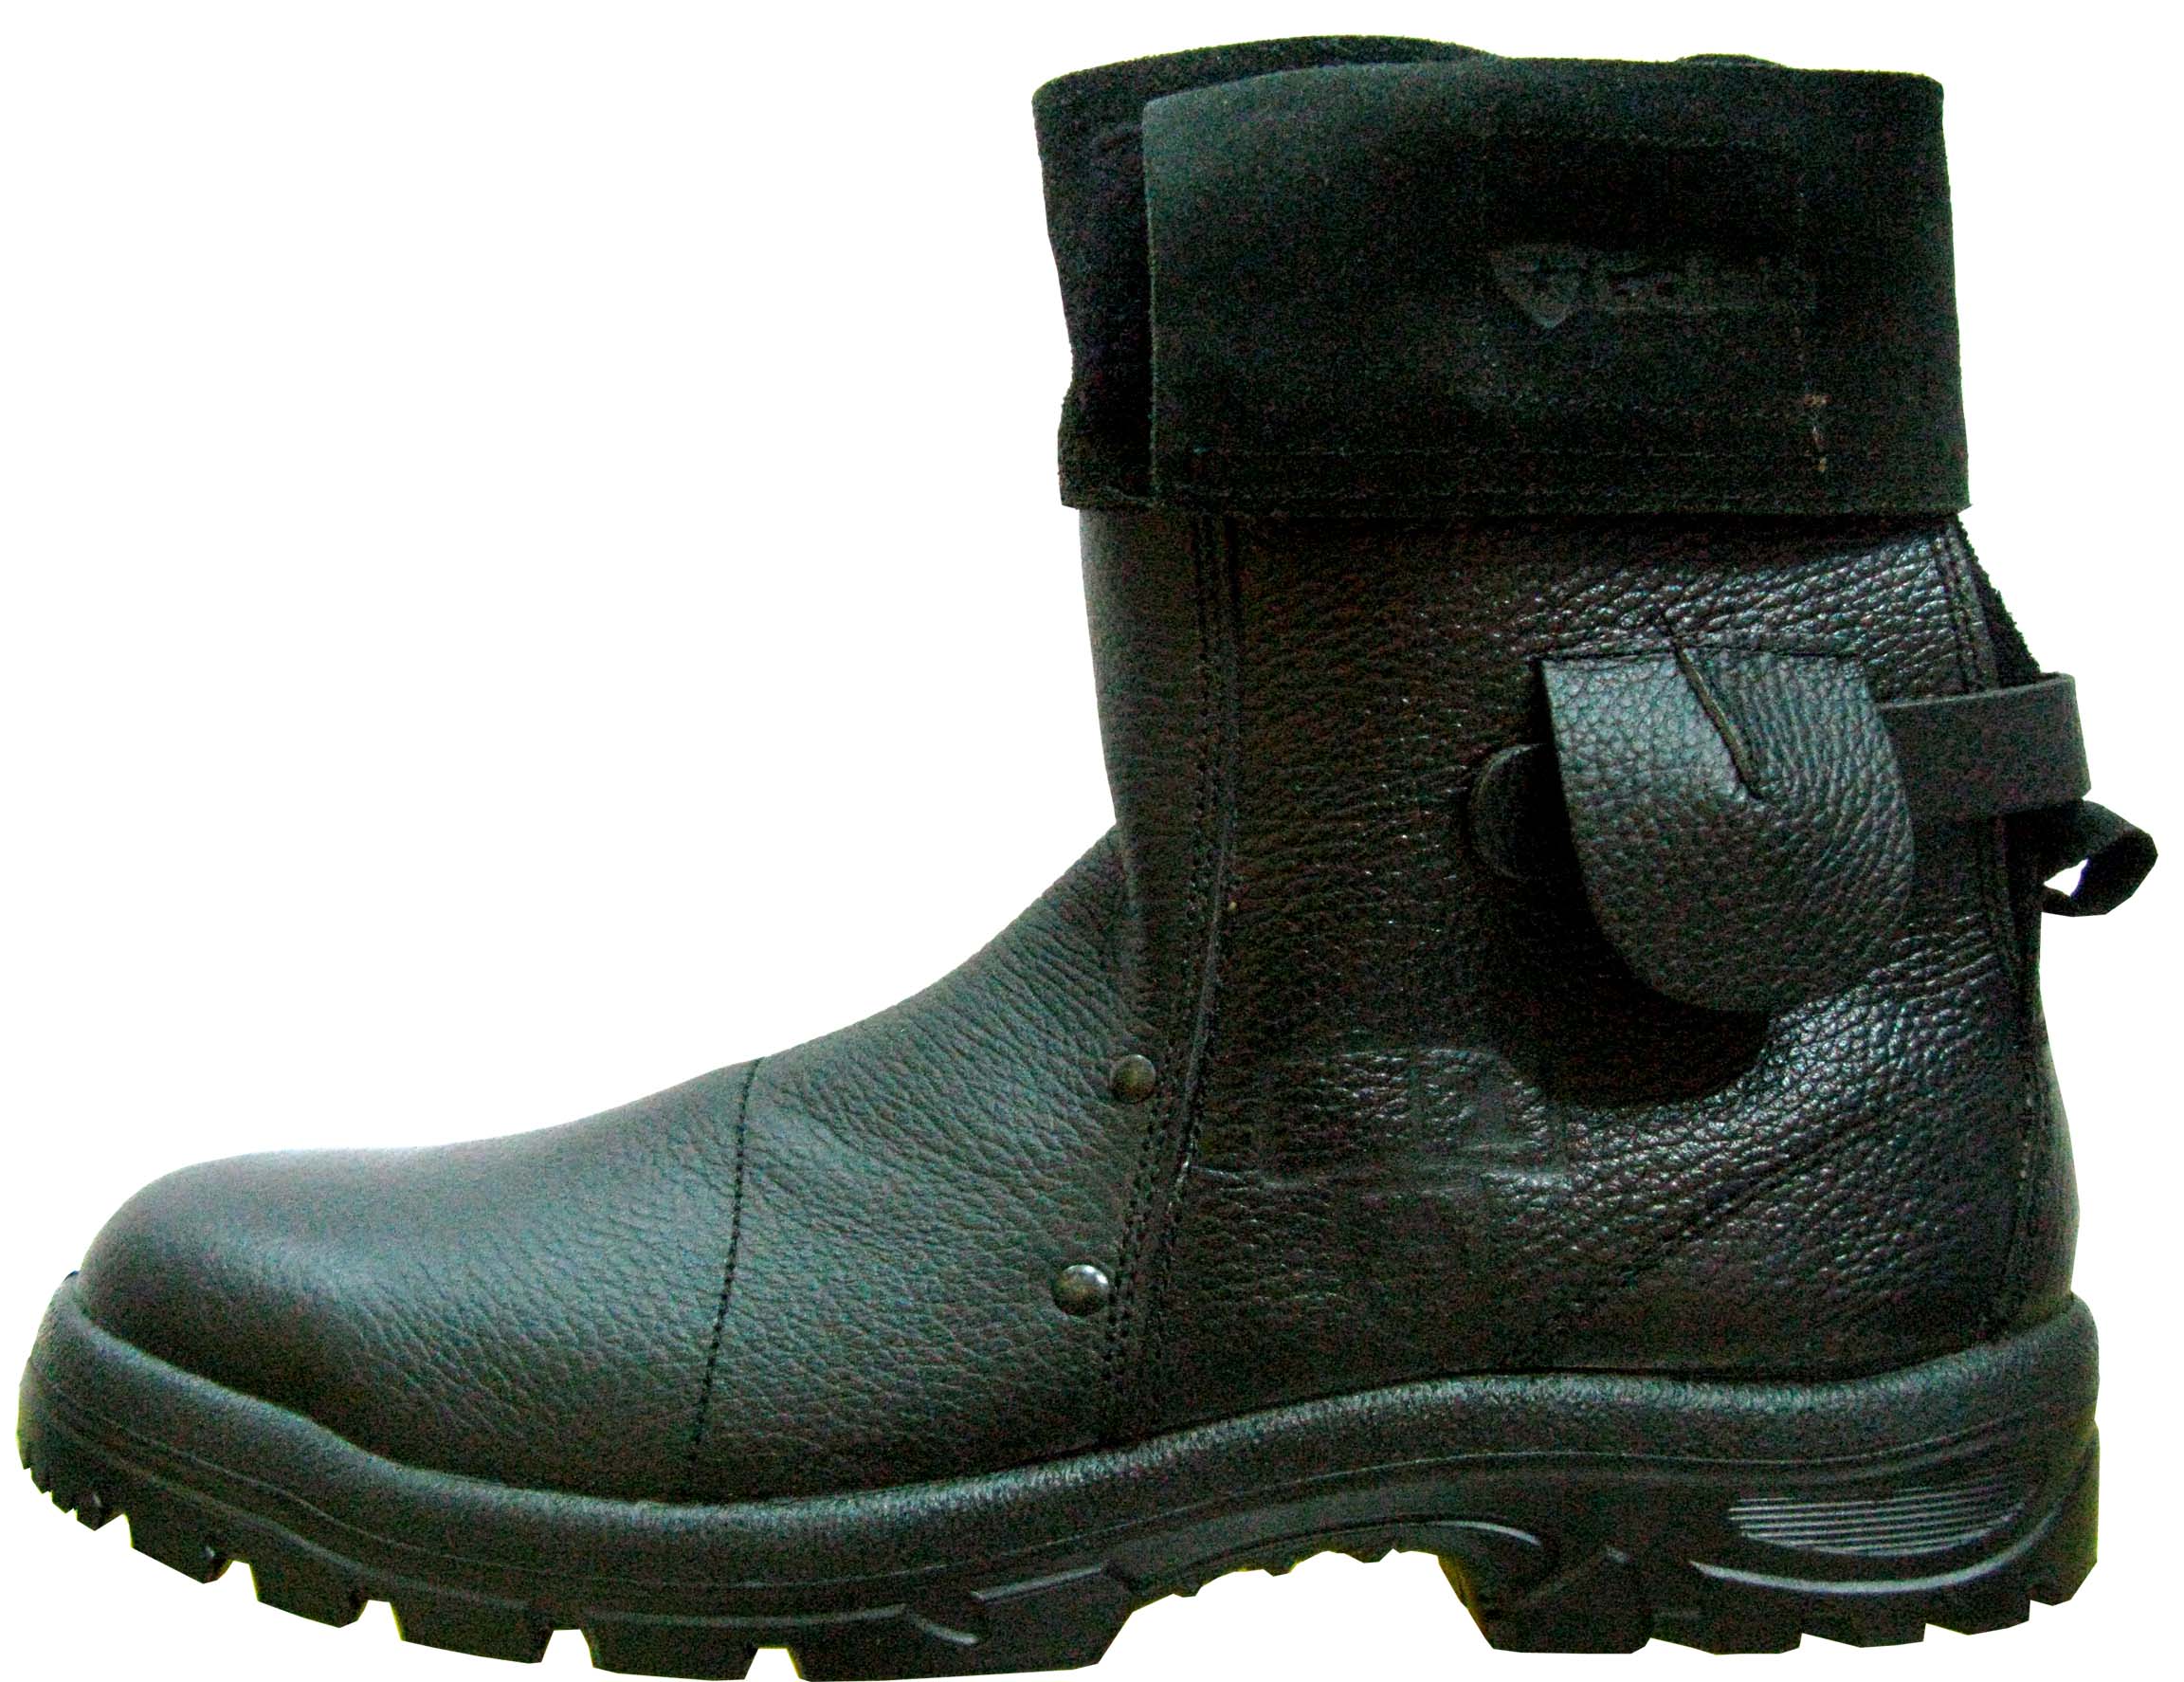  HM2004WSI Goliath High Length Foundry Boots, Special Heat Resistant-King of foundry